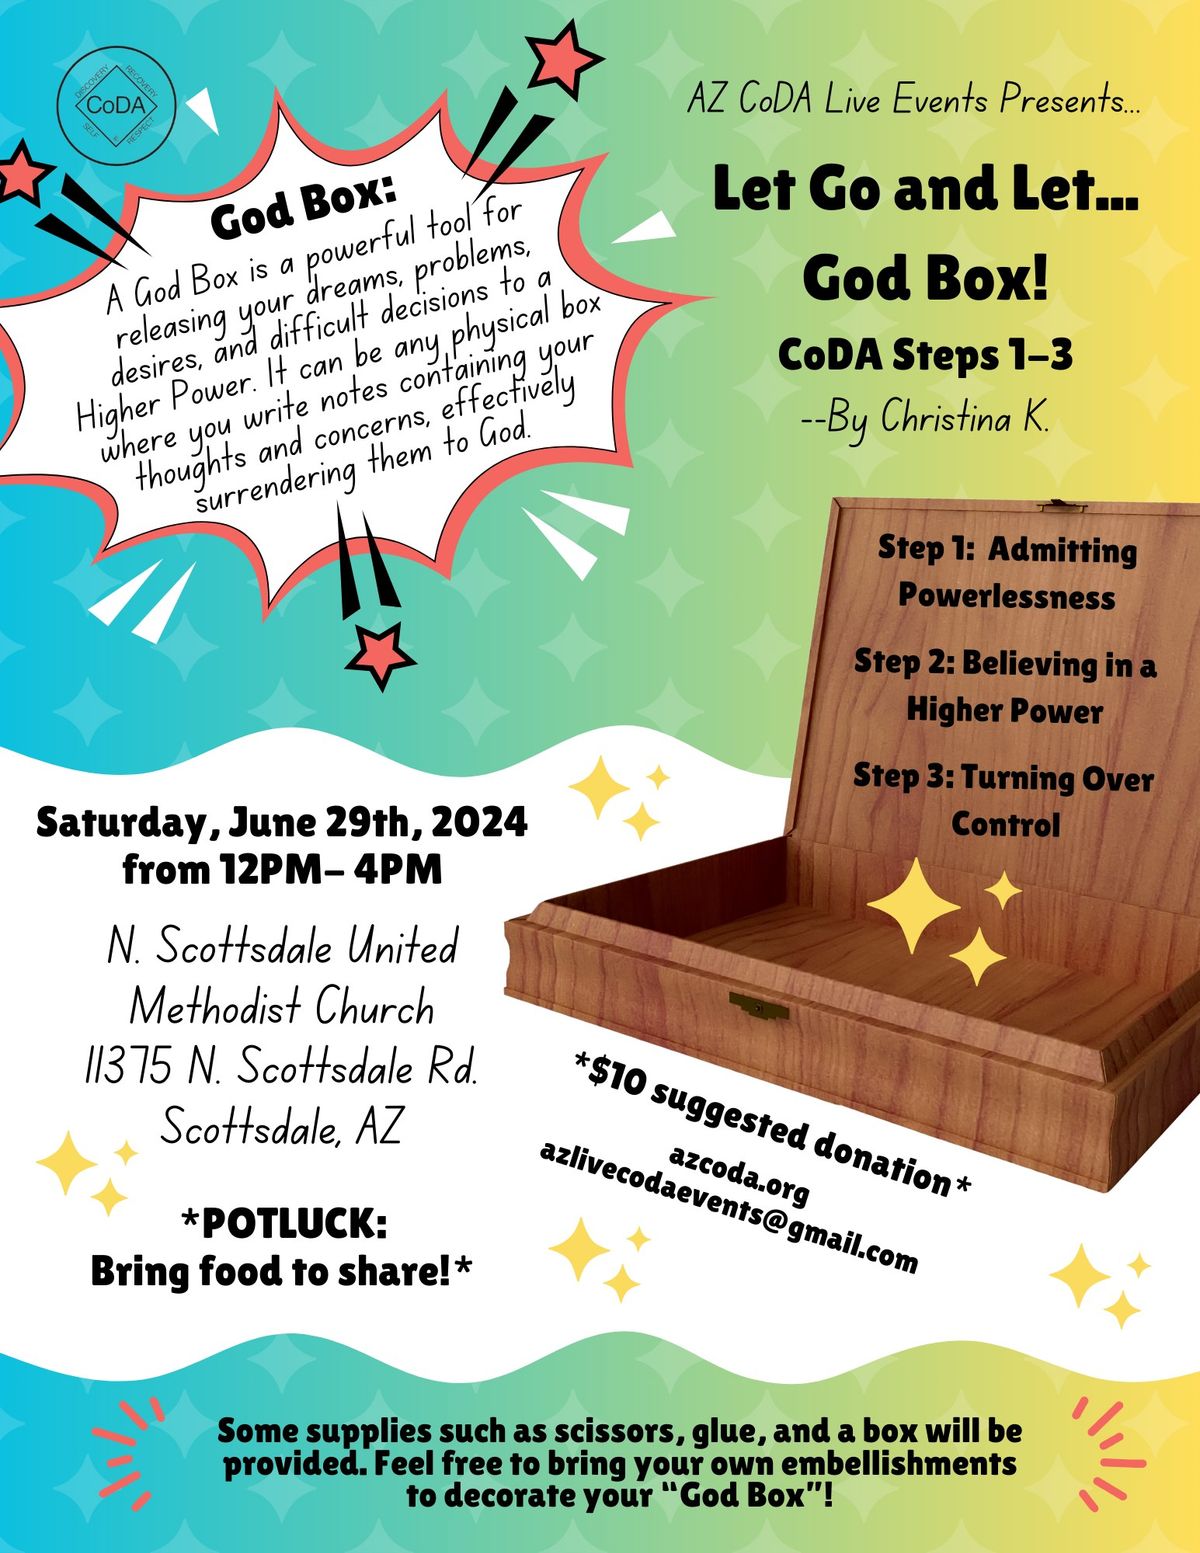 Let Go and Let...God Box!